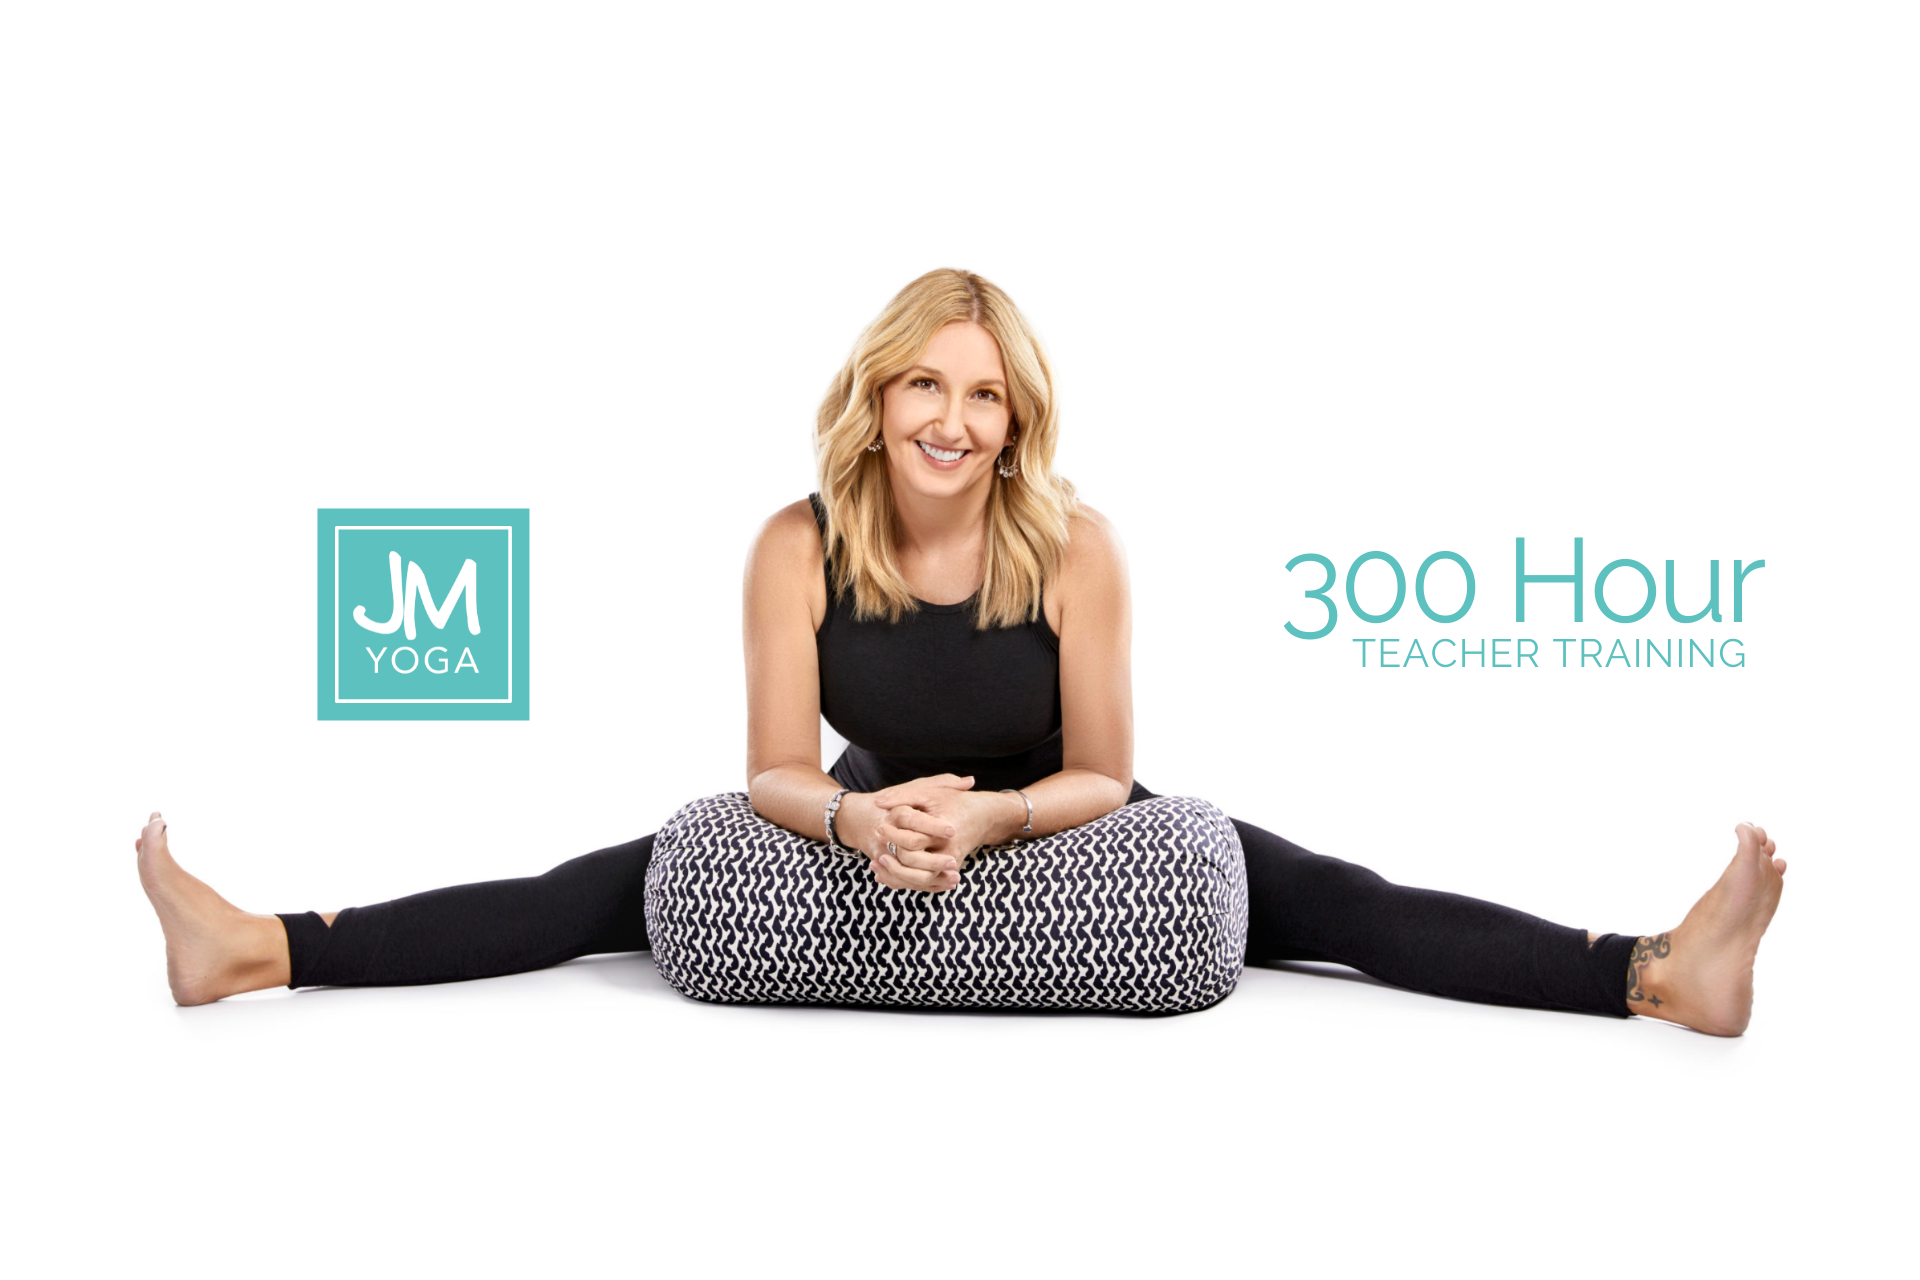 Jules is wearing black sitting in a wide leg forward fold resting her elbows on a black and white bolster against a white background. The words "300 hr yoga teacher training" are in green against the white background.